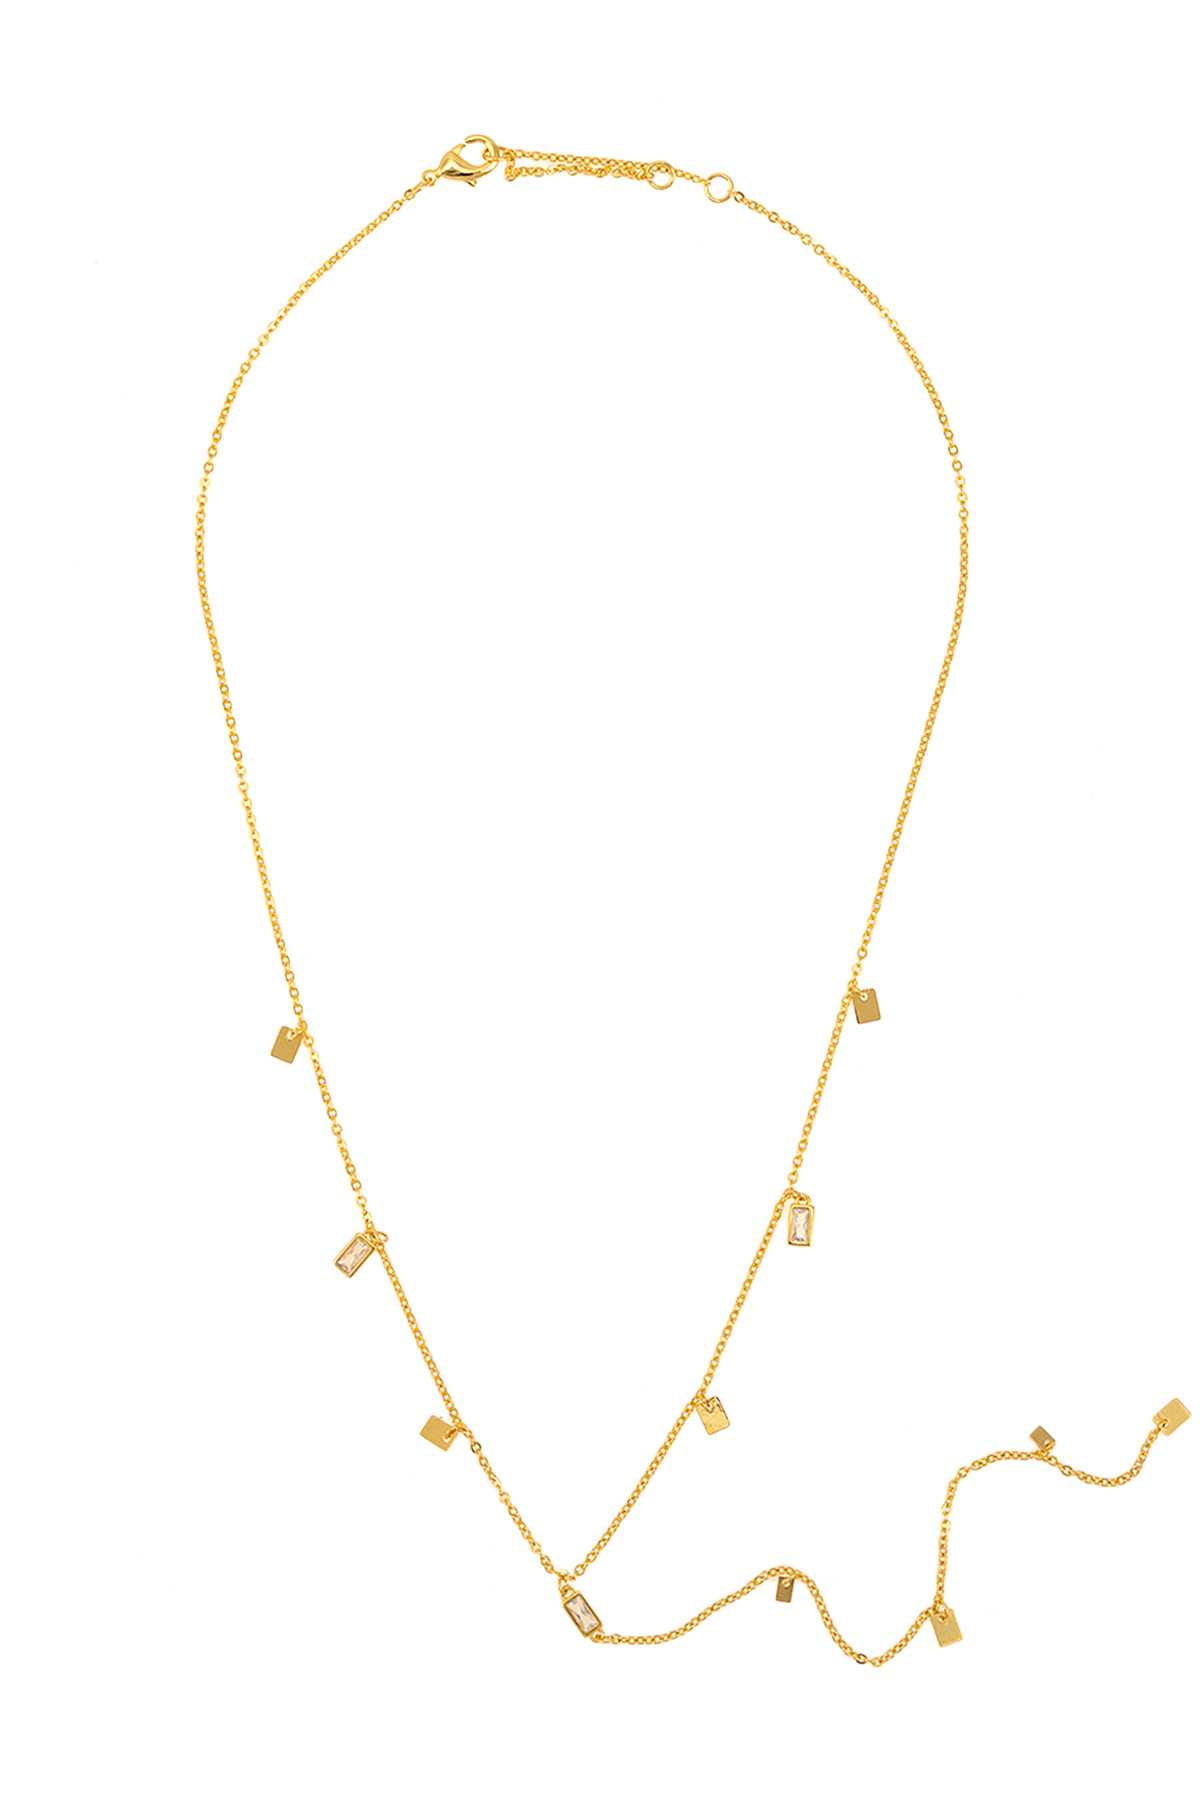 GOLD DIPPED SMALL SQUARE CHARM LARIAT NECKLACE